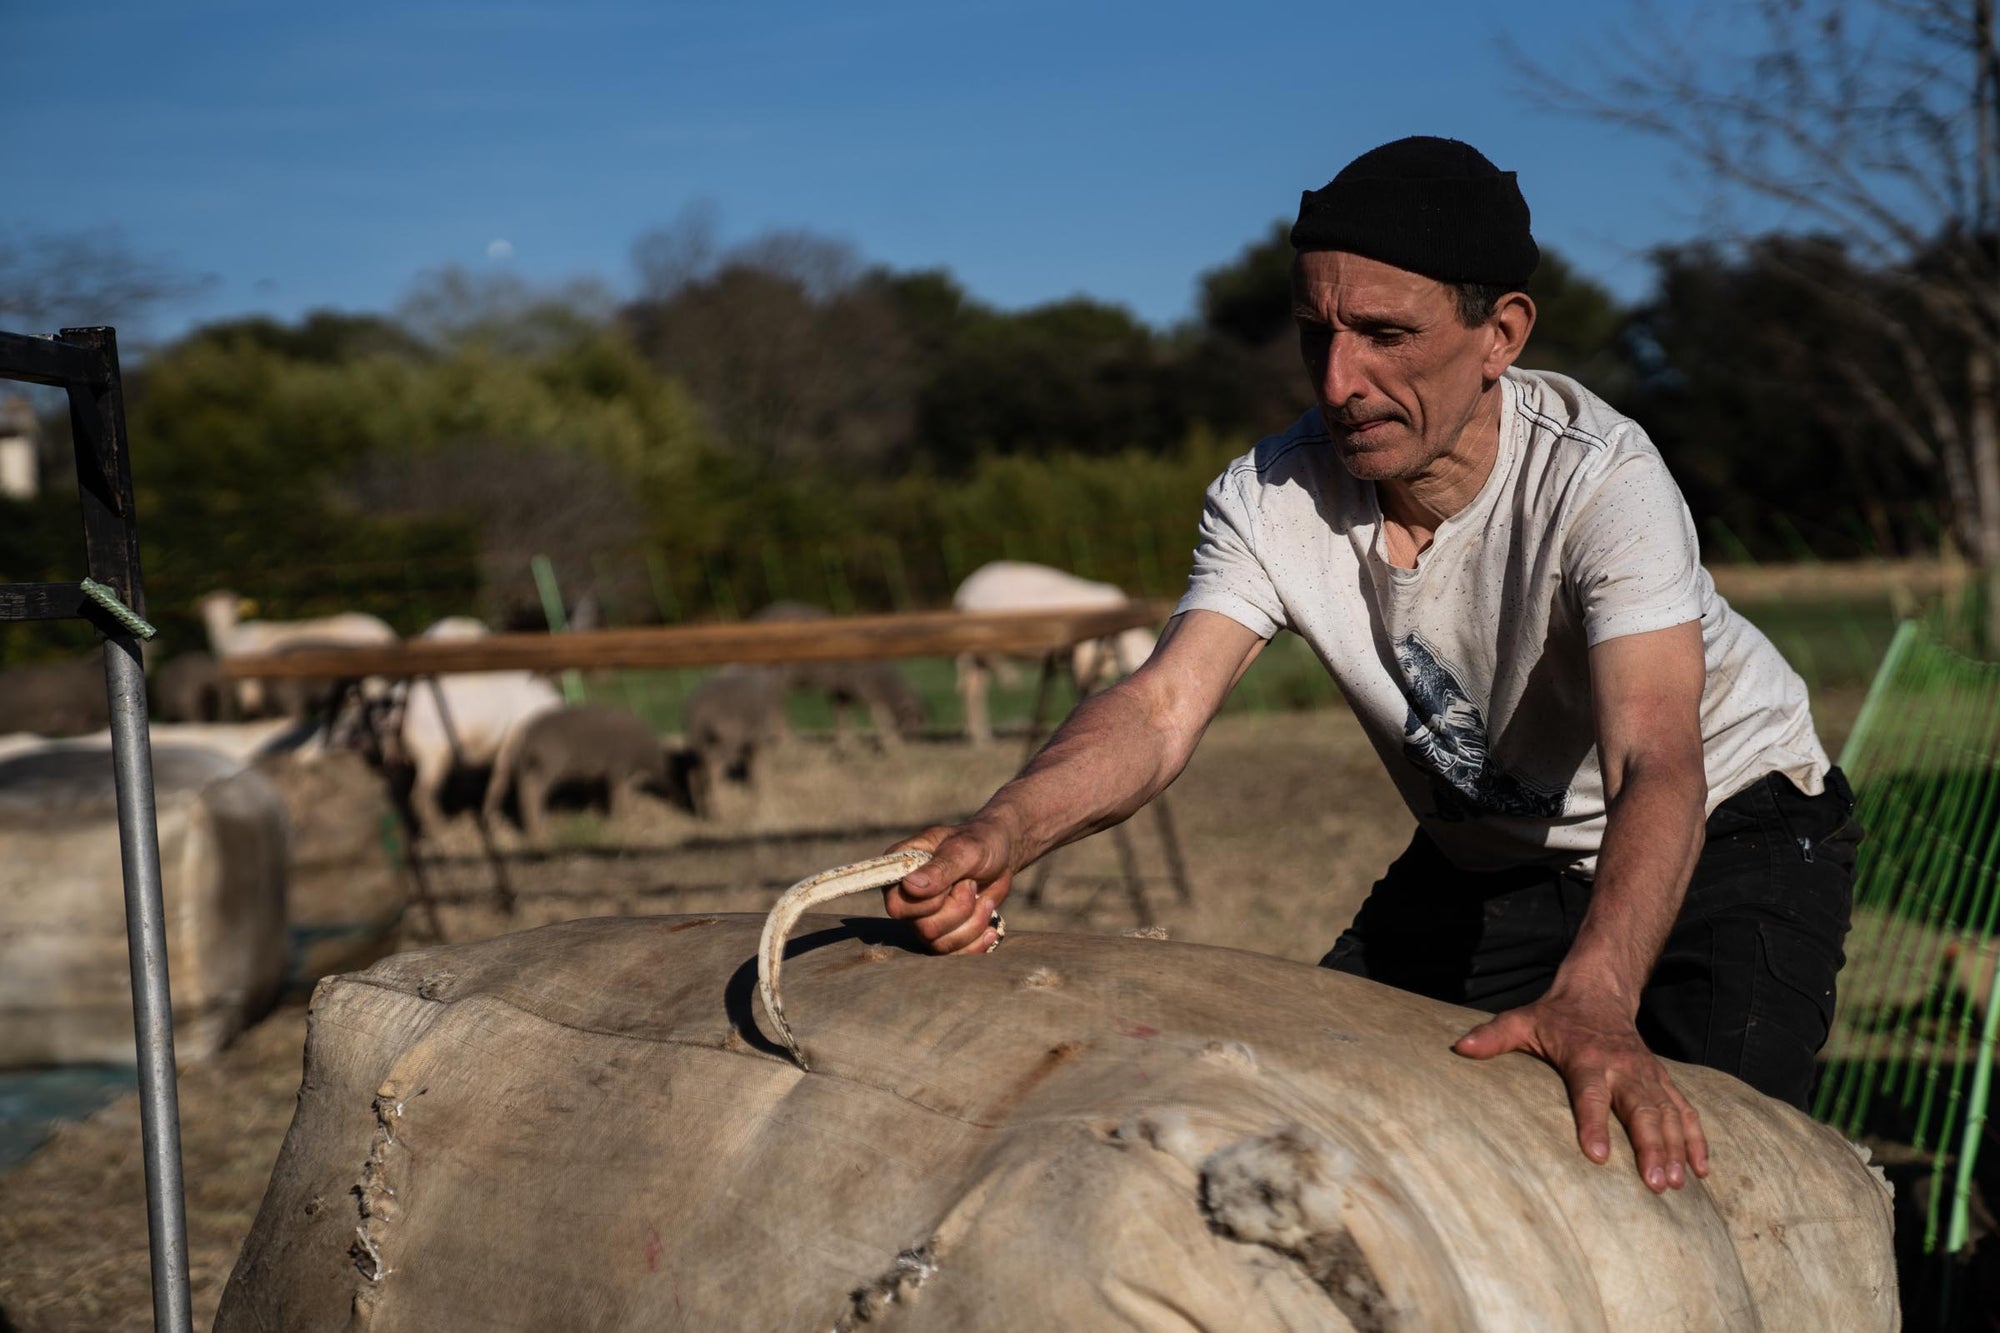 A man rolling a full bale of wool with a rural environment in the backdrop.